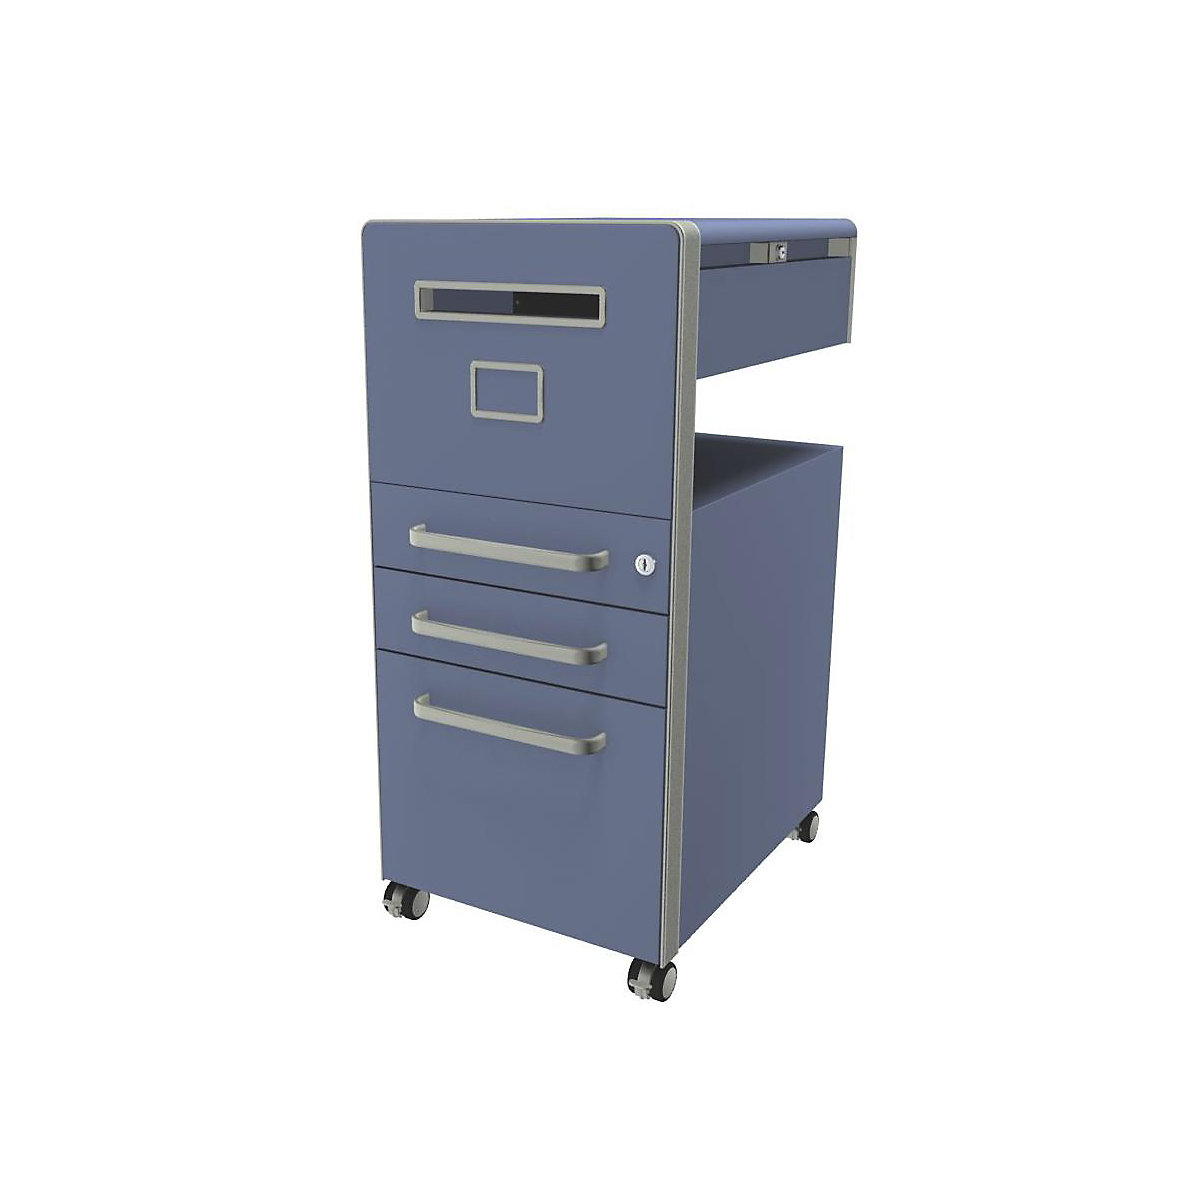 Bite™ pedestal furniture, with 1 whiteboard, opens on the left side – BISLEY, with 2 universal drawers, 1 suspension file drawer, blue-15